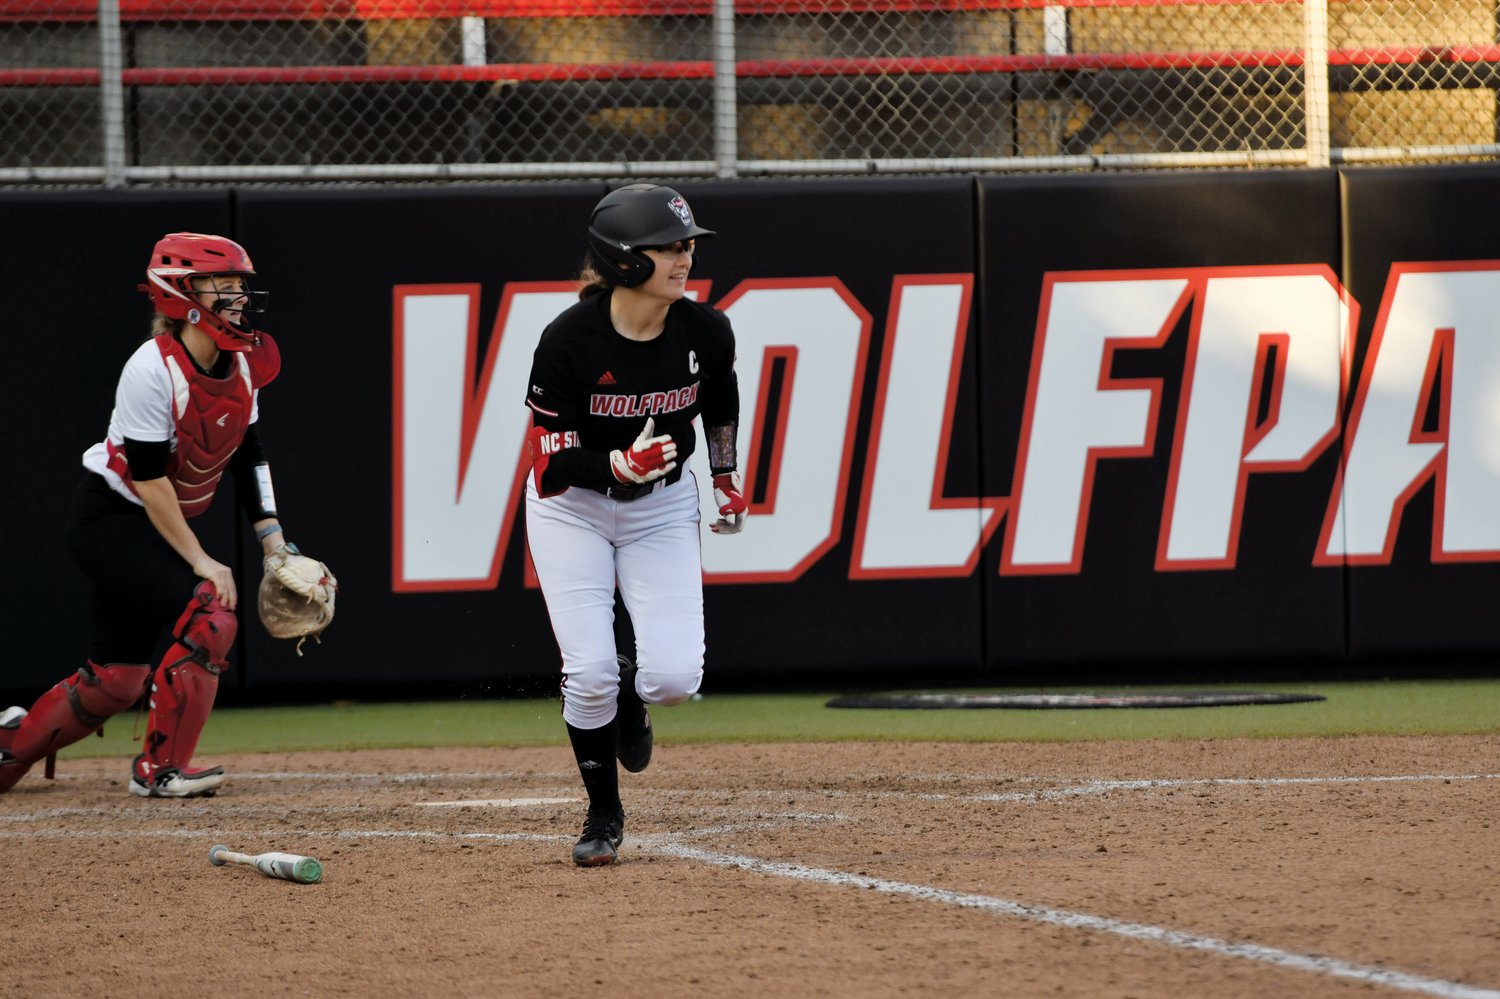 N.C. State outfielder Carson Shaner (in black) darts toward first base after making contact with a pitch in the Wolfpack's 5-2 win over the Fairfield Stags on Feb. 18.